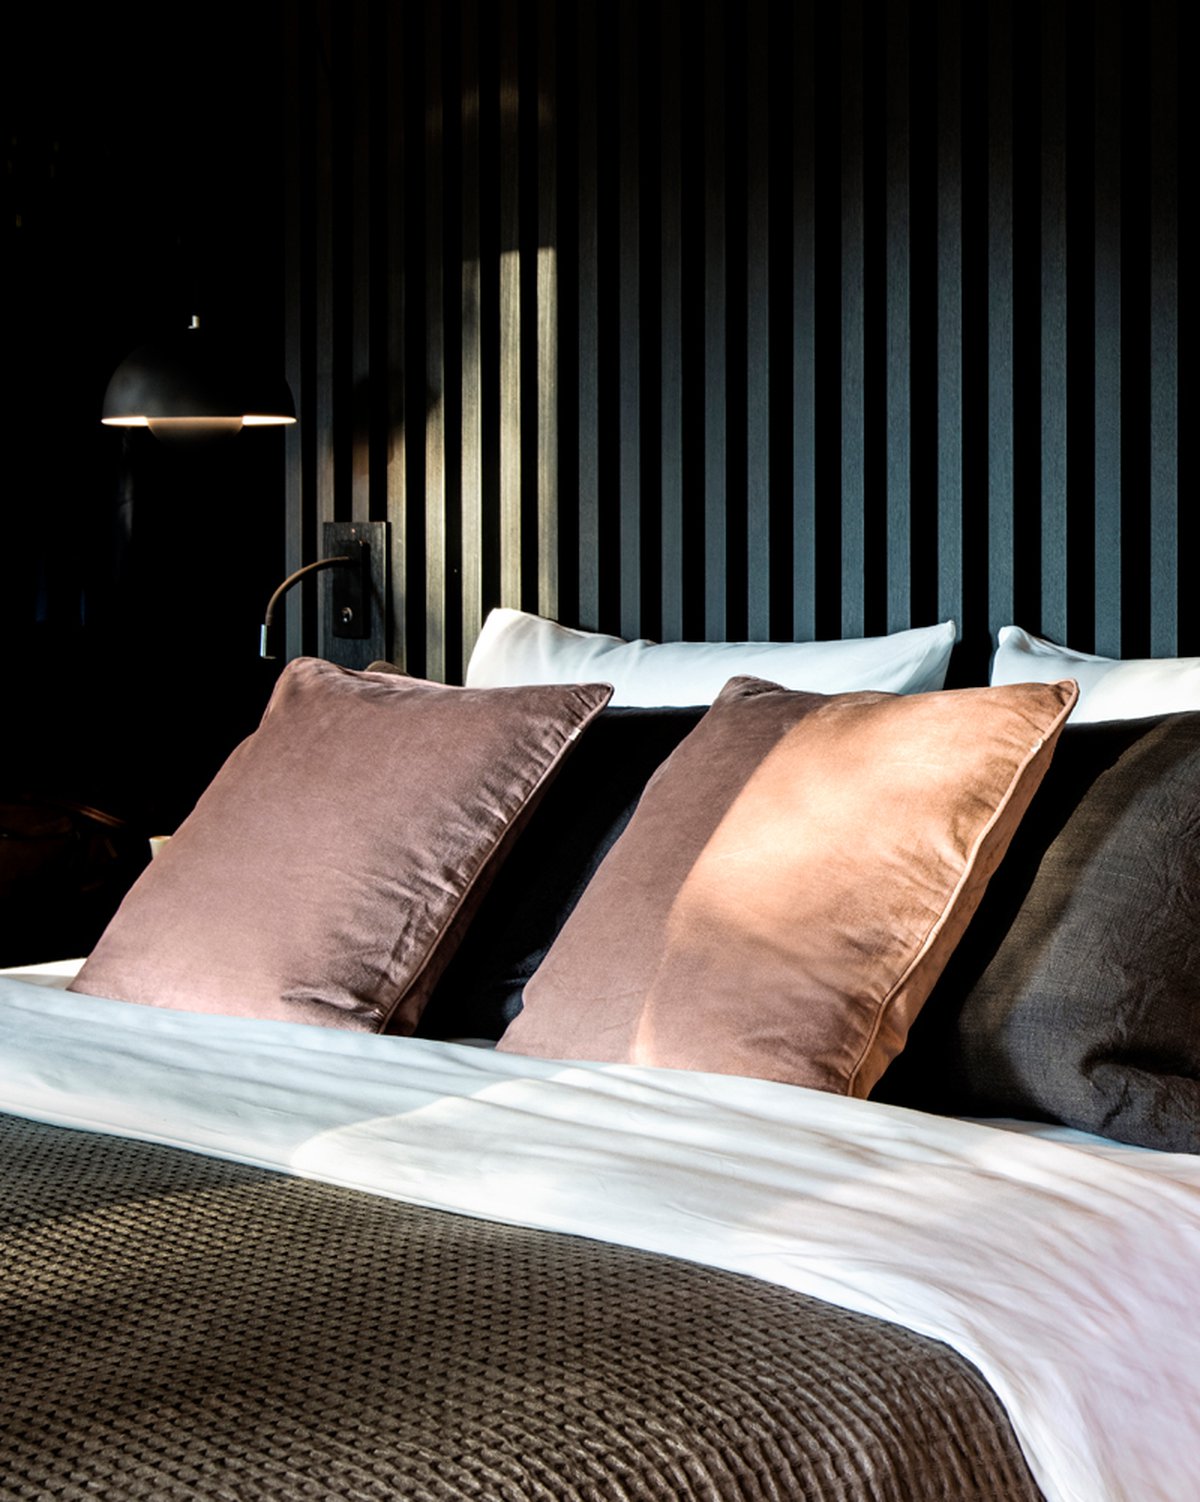 tinekhome velvet and linen cushions at Hotel Mauritzhof Münster